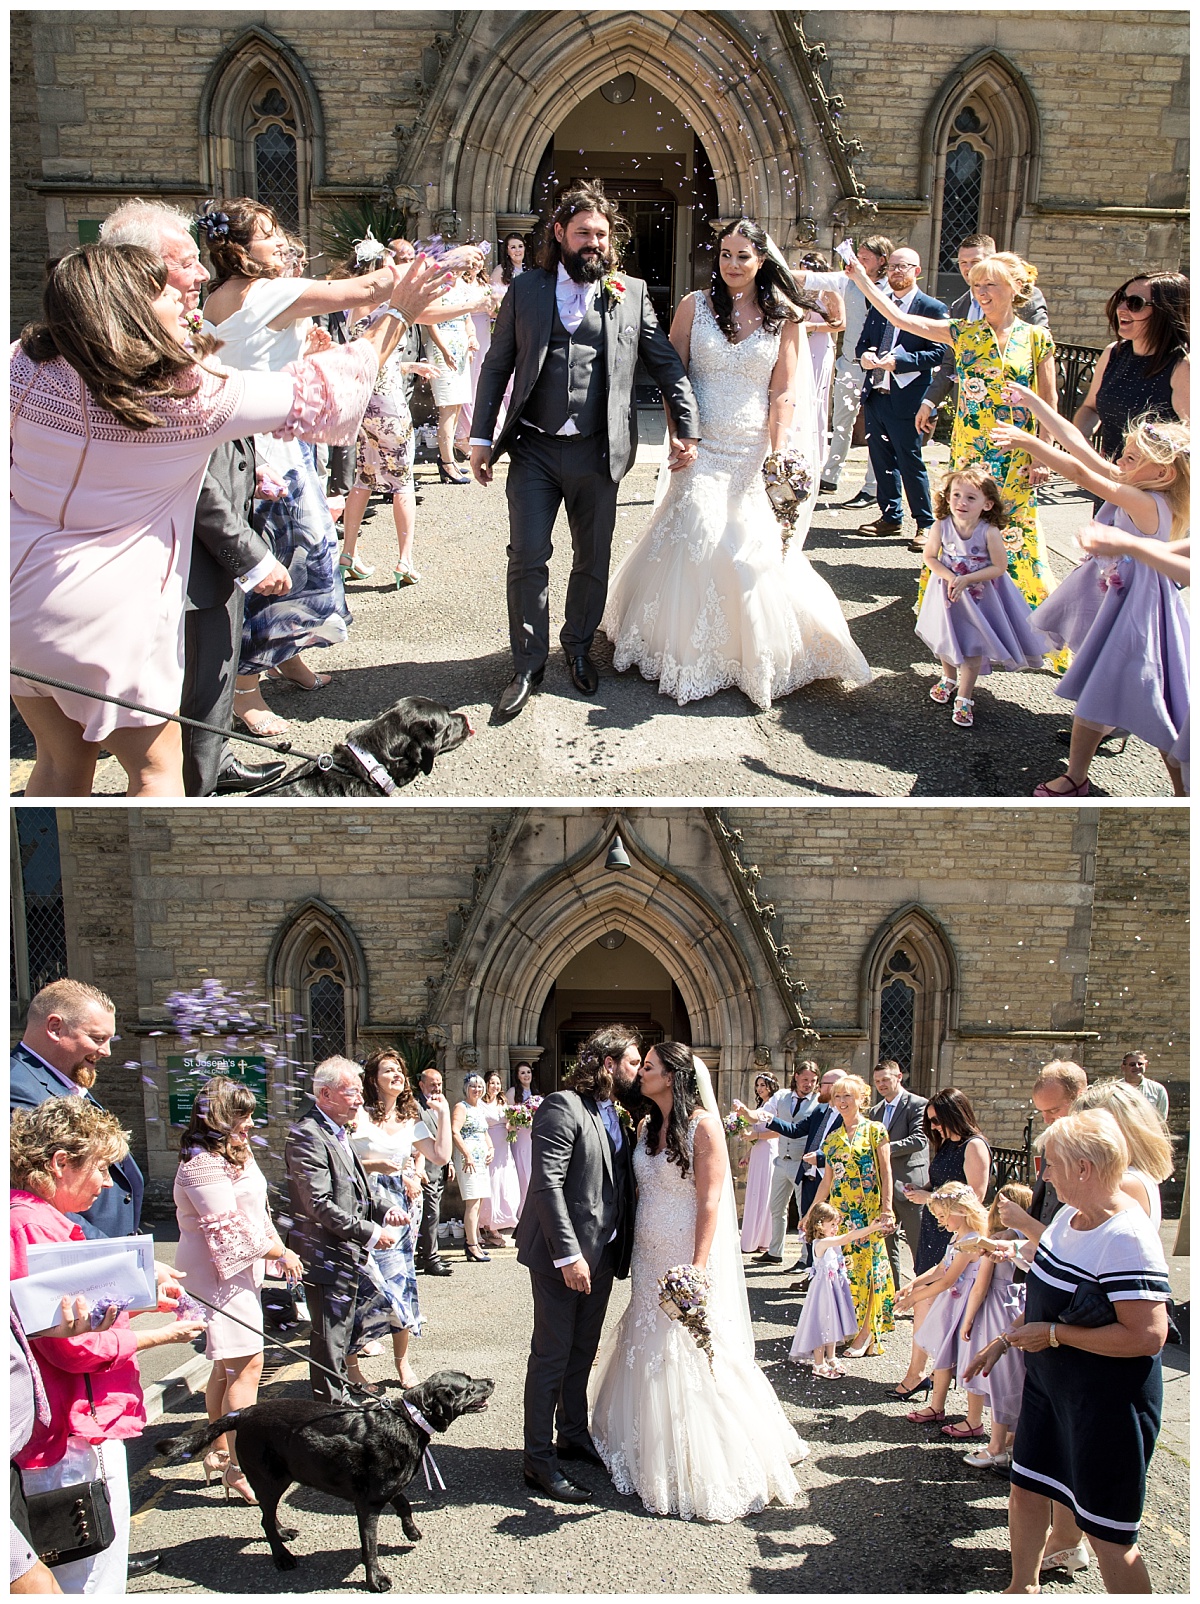 Wedding Photography Manchester - Lauren and Colyn's Wizard Wedding 32